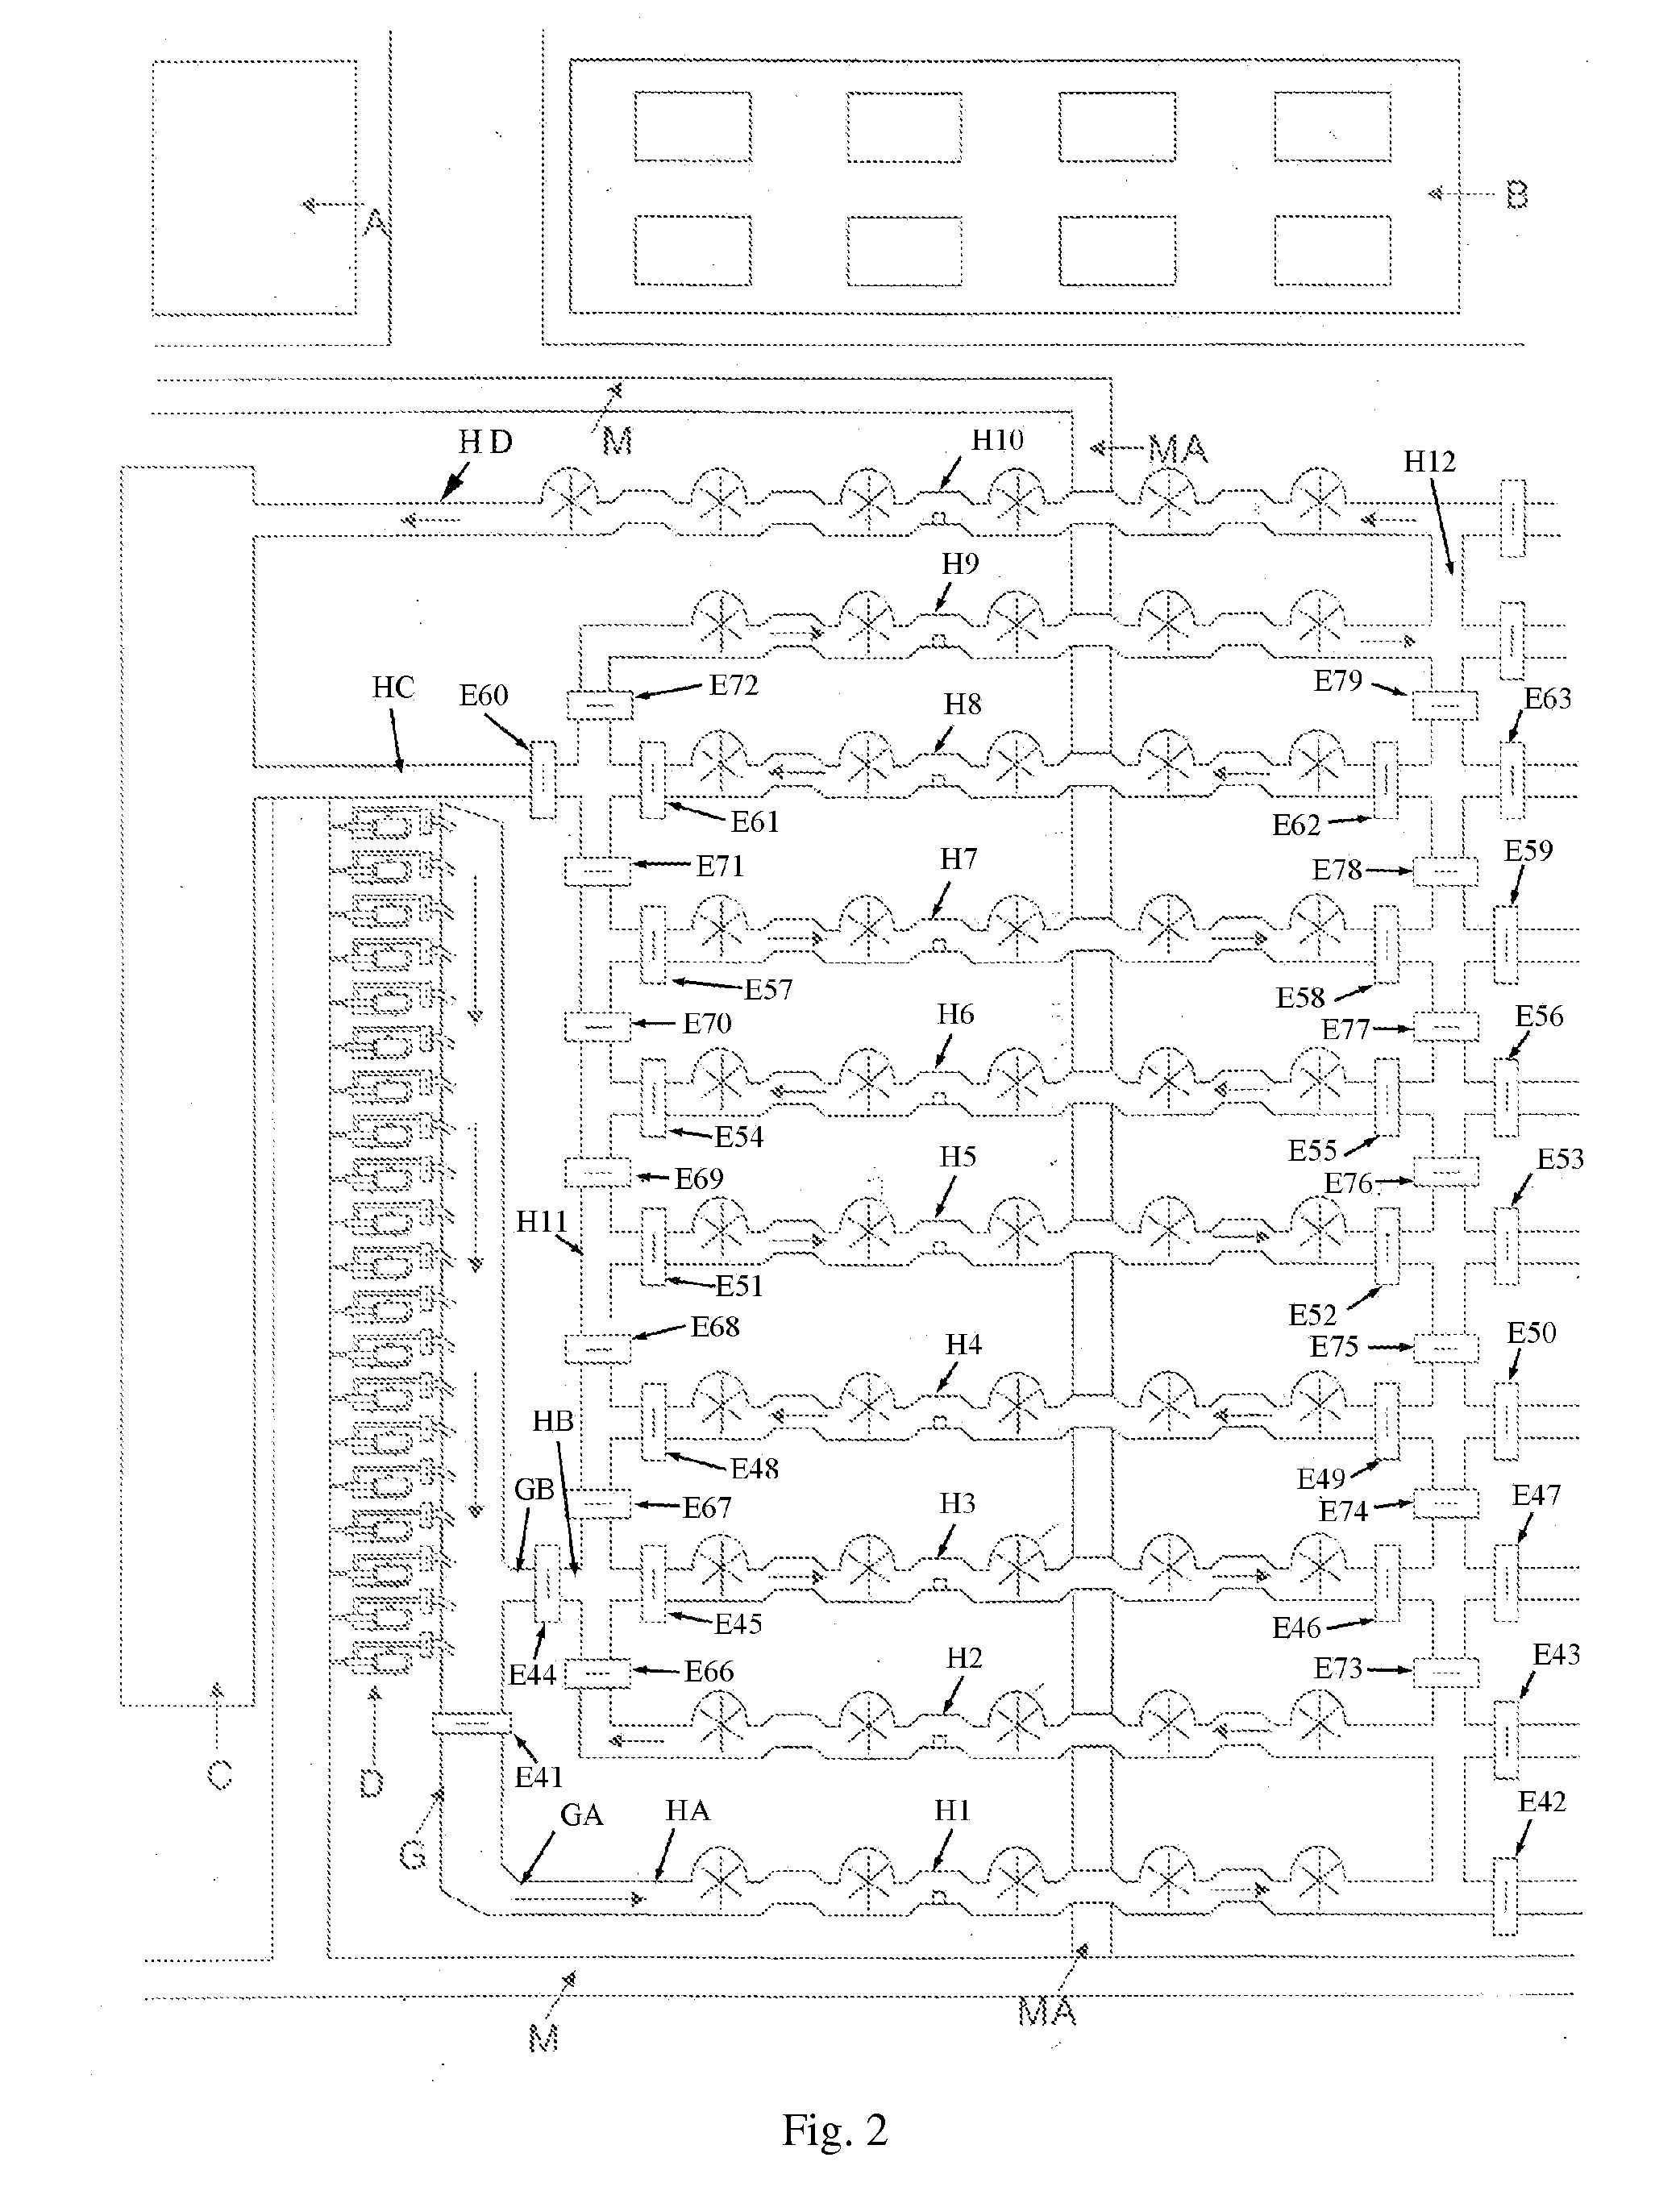 Expandable multi-set circulation hydroelectric power generation method and system